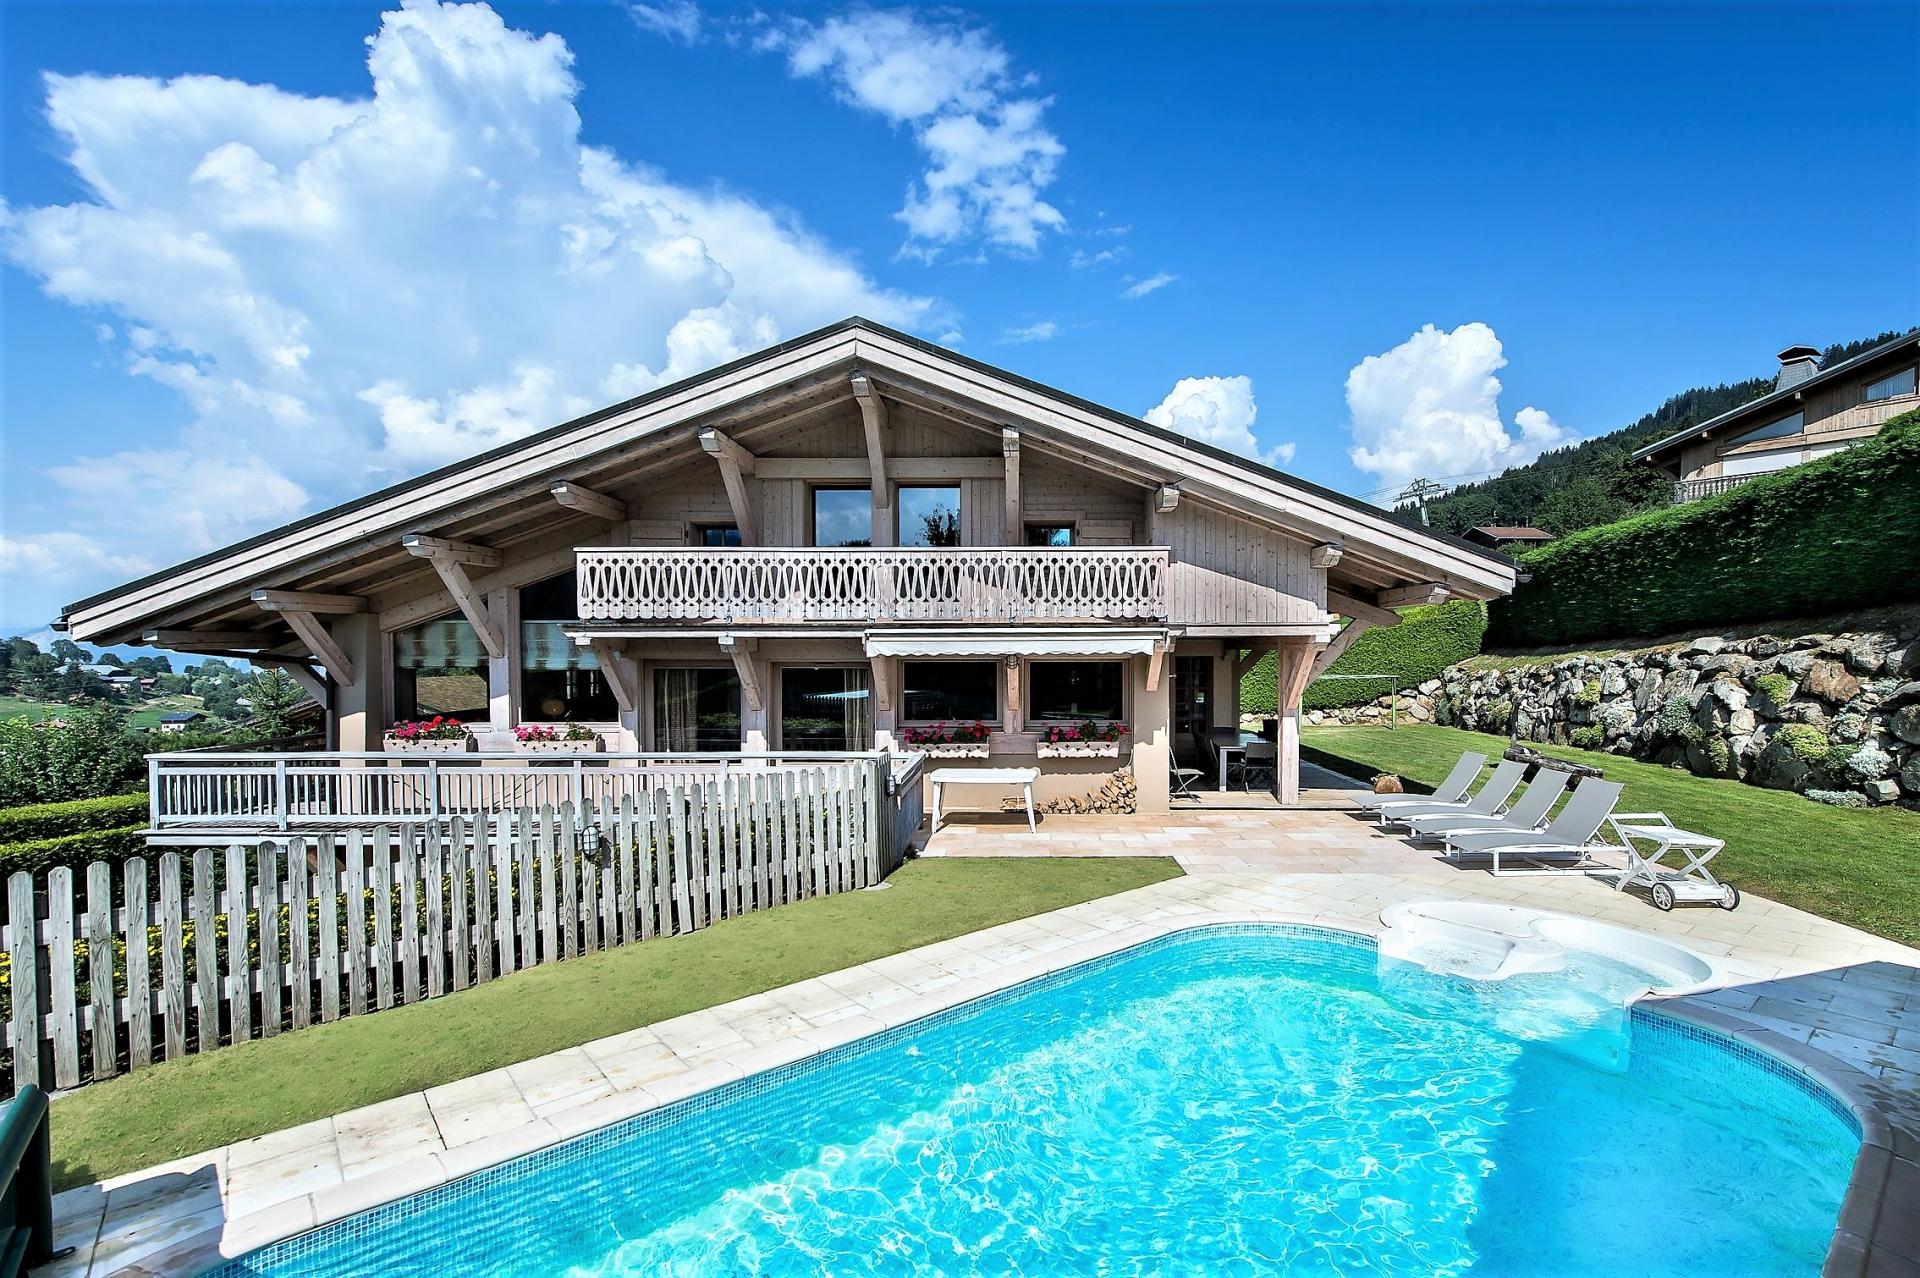 CHALET ARAVIS IS ALSO A SUMMER HOLIDAY RENTAL WITH ITS OUTDOOR SWIMMING POOL